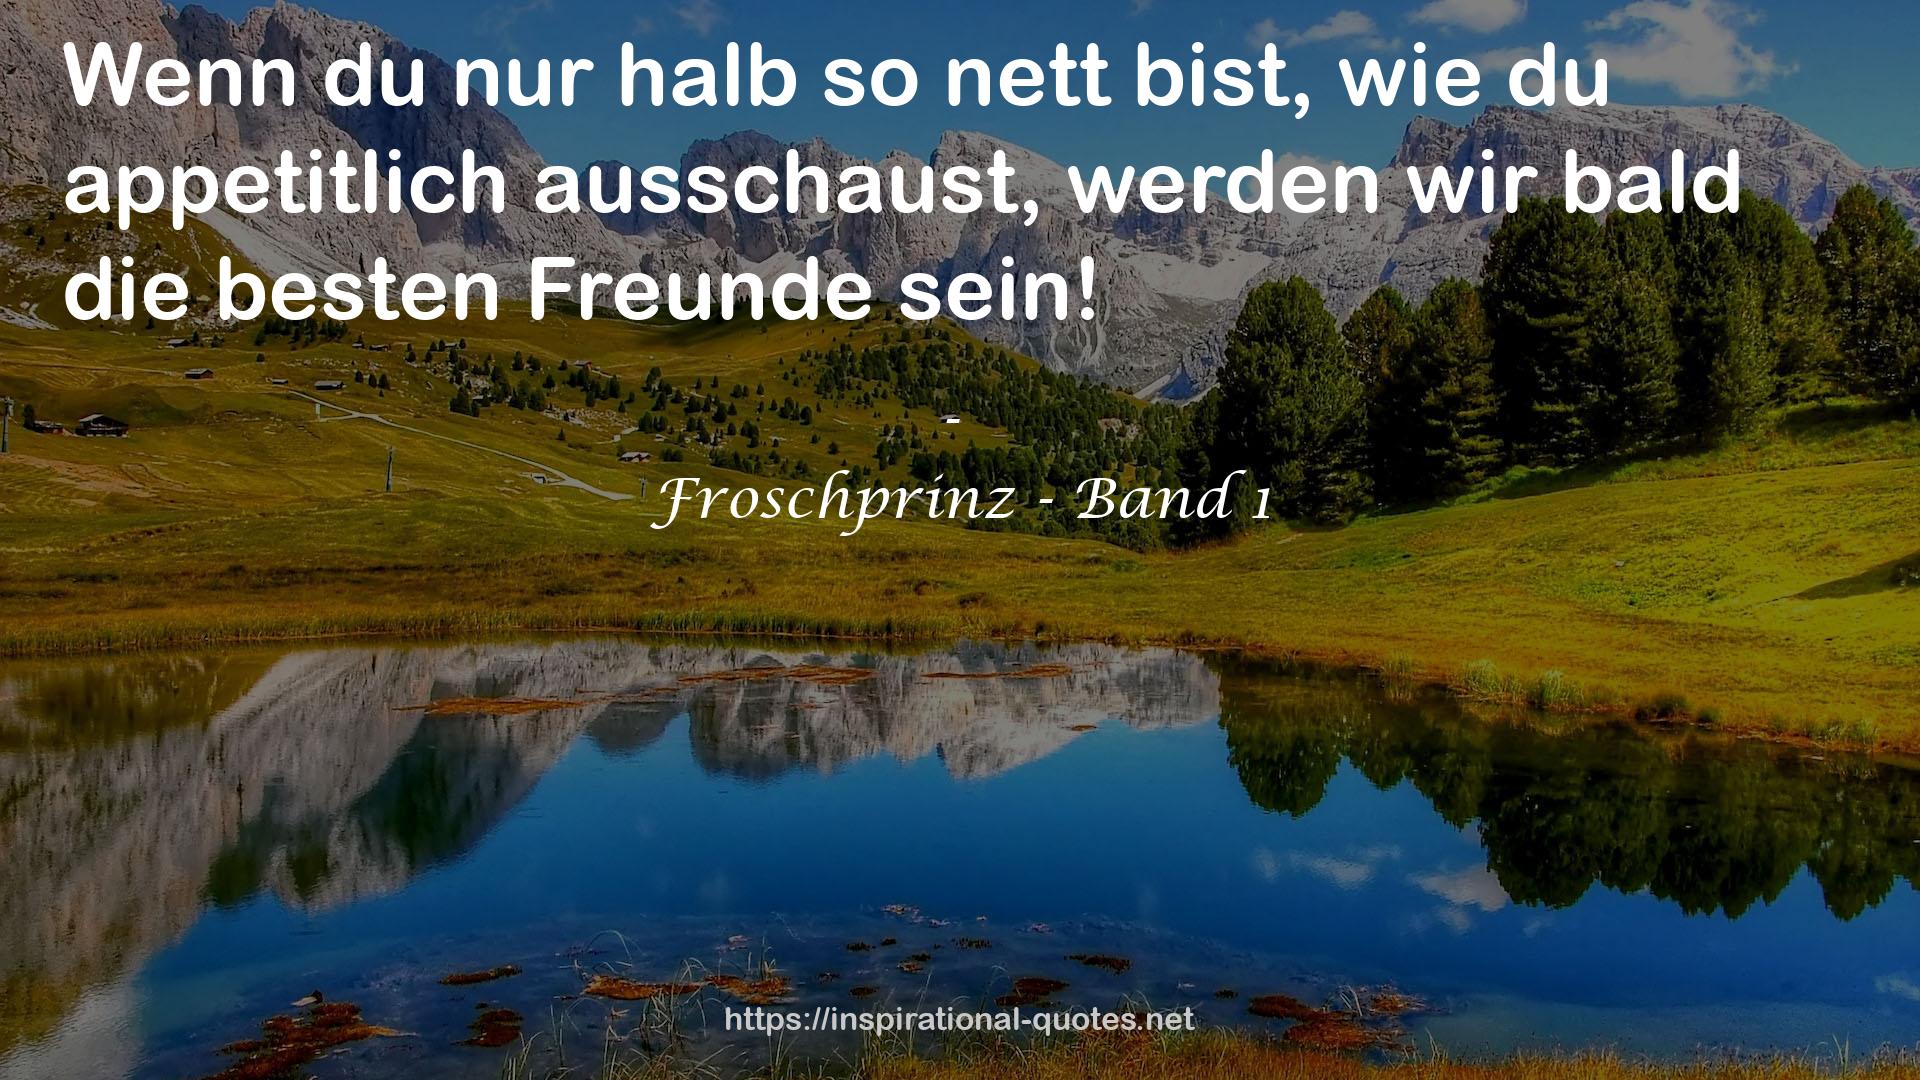 Froschprinz - Band 1 QUOTES